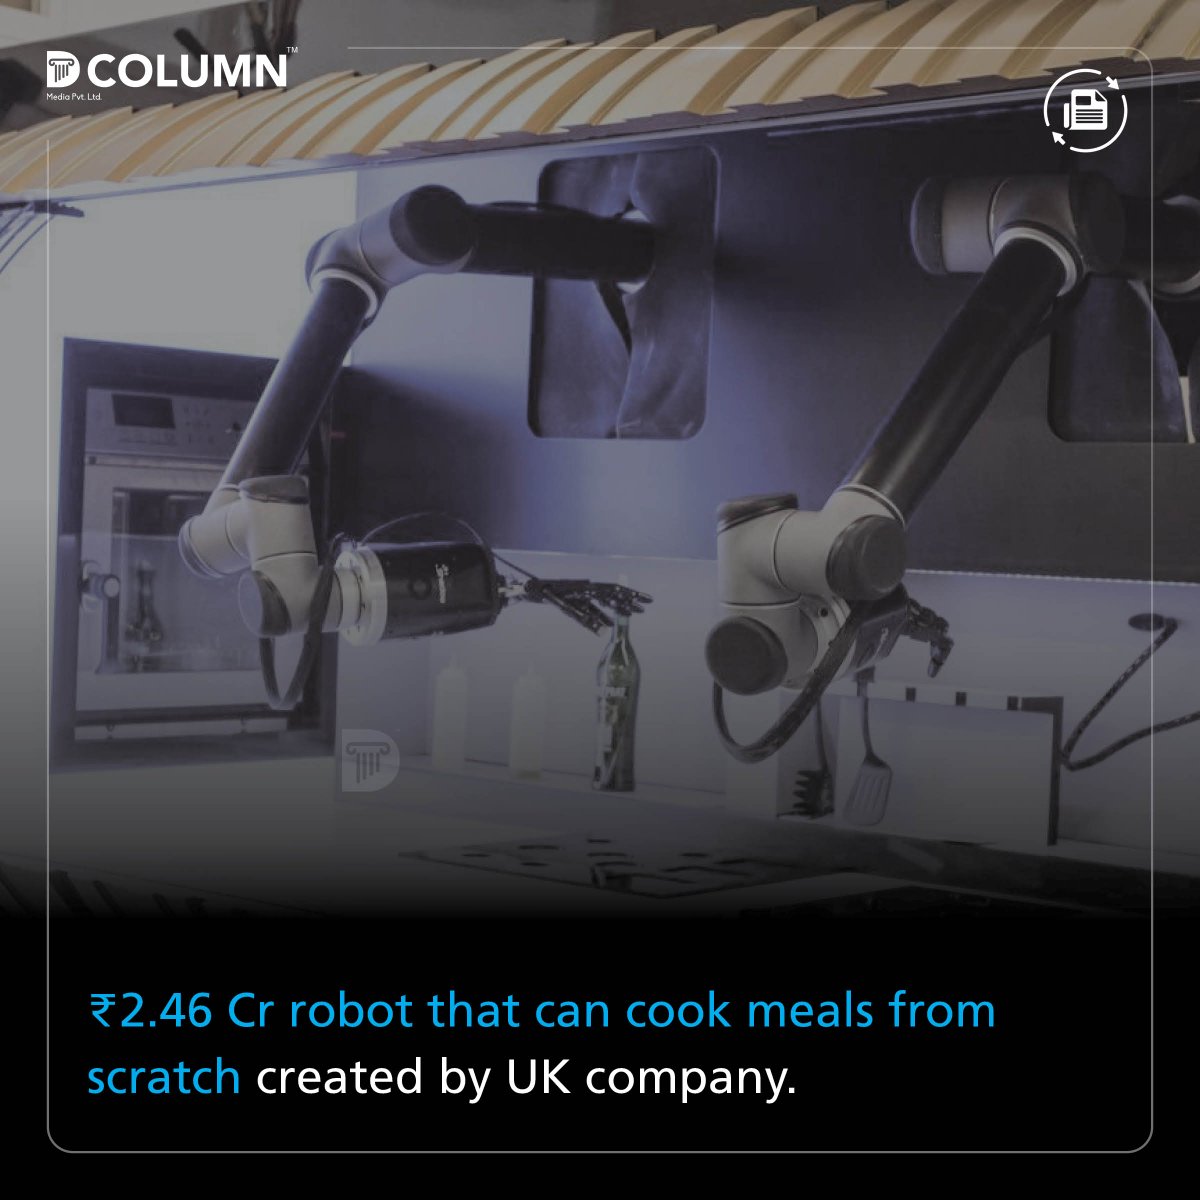 London based robotics company developed a two robotic arm Kitchen Robot worth 2.46 crore rs. That can cook meals from scratch and clean up the kitchen afterward.

#thecolumn #internationalnews #london #kitchenrobot #robotics #cookmeal #technology #artificialintelligence